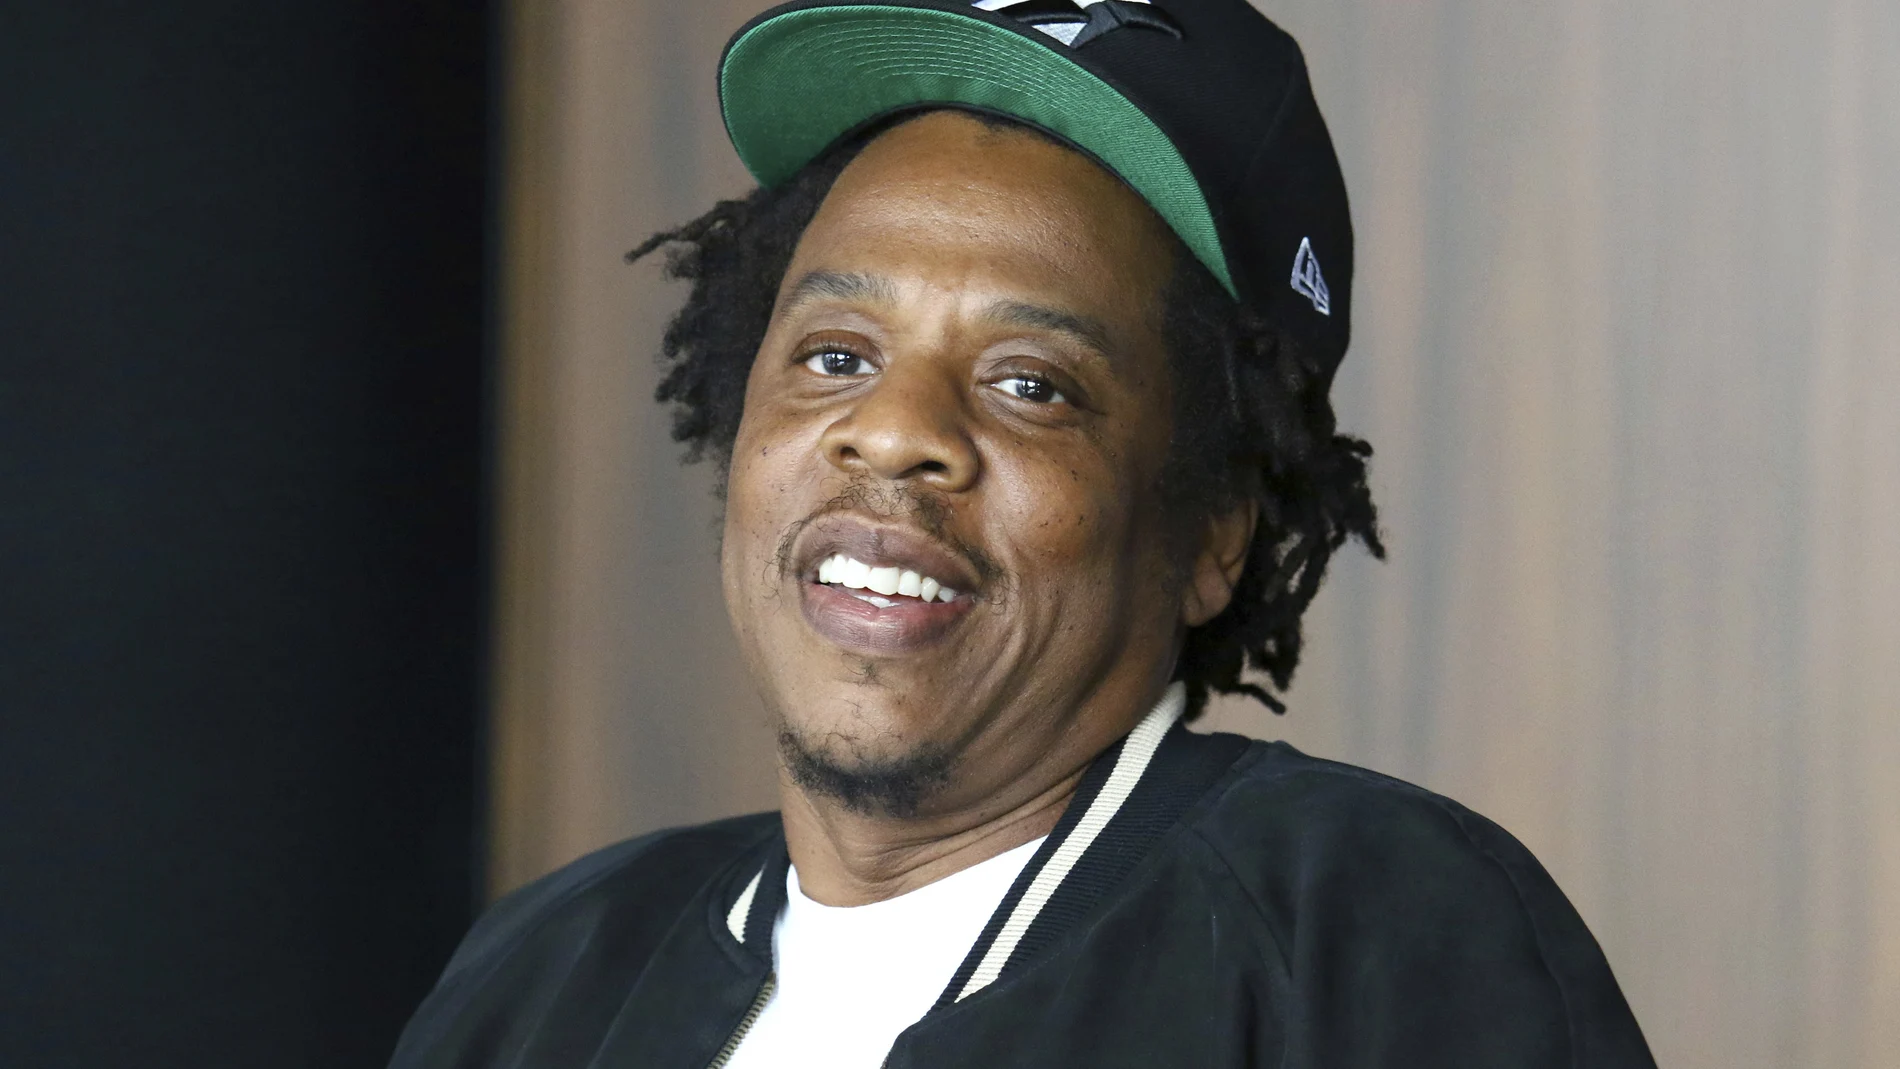 FILE - In this July 23, 2019, file photo, Jay-Z makes an announcement of the launch of Dream Chasers record label in joint venture with Roc Nation, at the Roc Nation headquarters in New York. Moet Hennessy is acquiring a 50% stake in the rapper and entrepreneur's Champagne brand, Armand de Brignac, in an effort to up its cool factor and expand sales. Jay-Z, whose real name is Shawn Carter, said the partnership will help Armand de Brignac grow and flourish.Â Â (Photo by Greg Allen/Invision/AP, File)